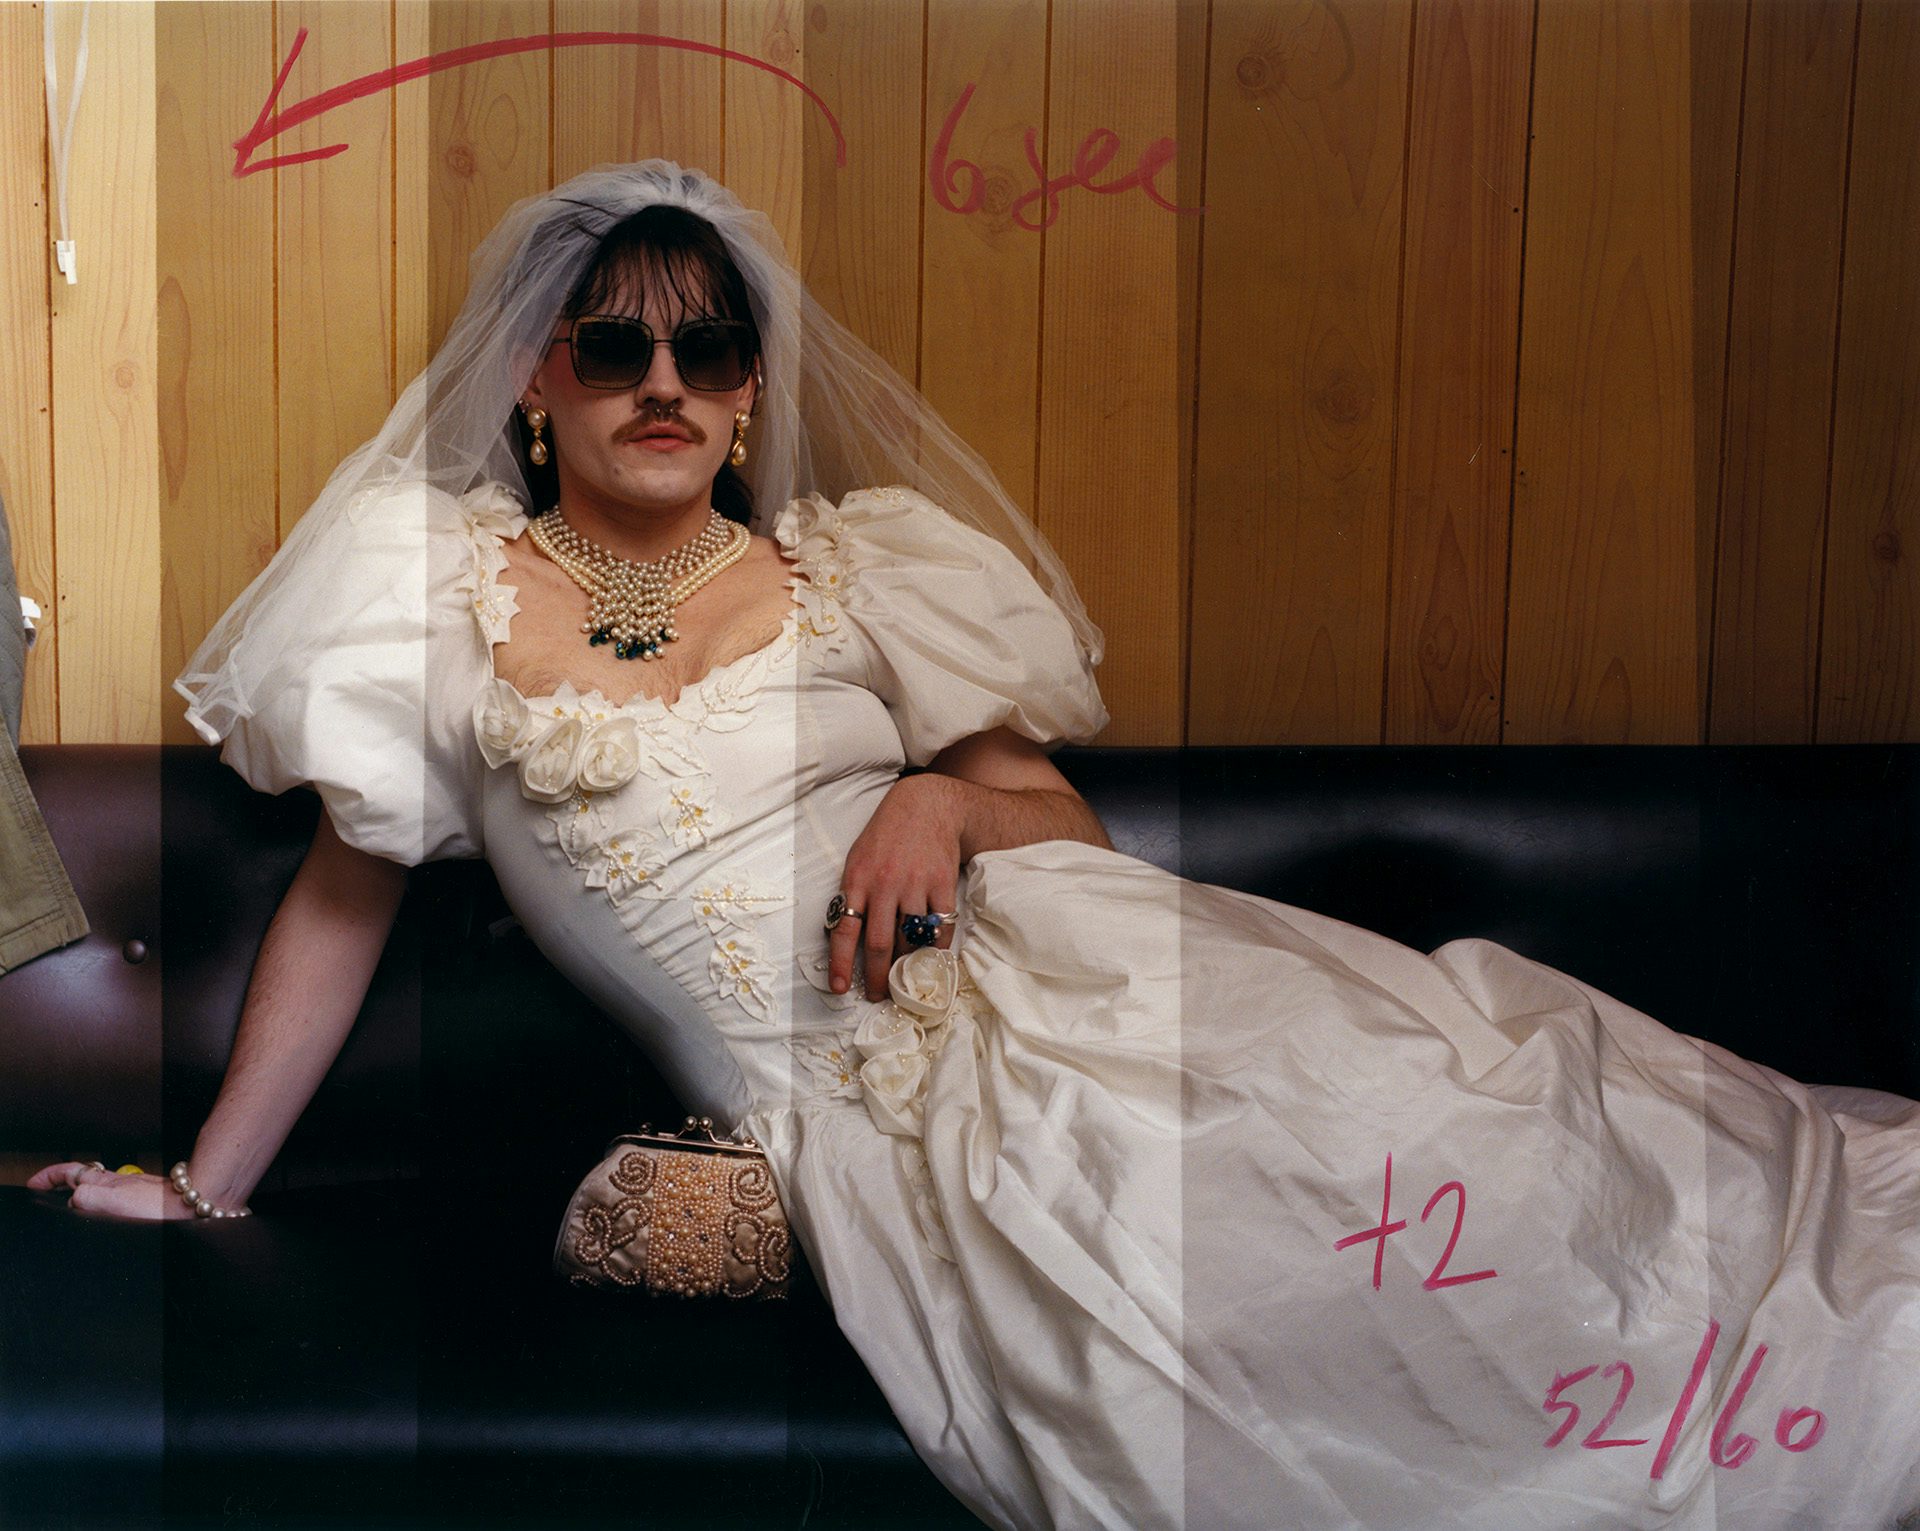 Oliver Chanarin A Perfect Sentence showing a person with a moustache and sunglasses and wearing a wedding dress and veil on a black sofa. The image is covered in red handwritten mark-ups, and has different brightness levels like a strip test